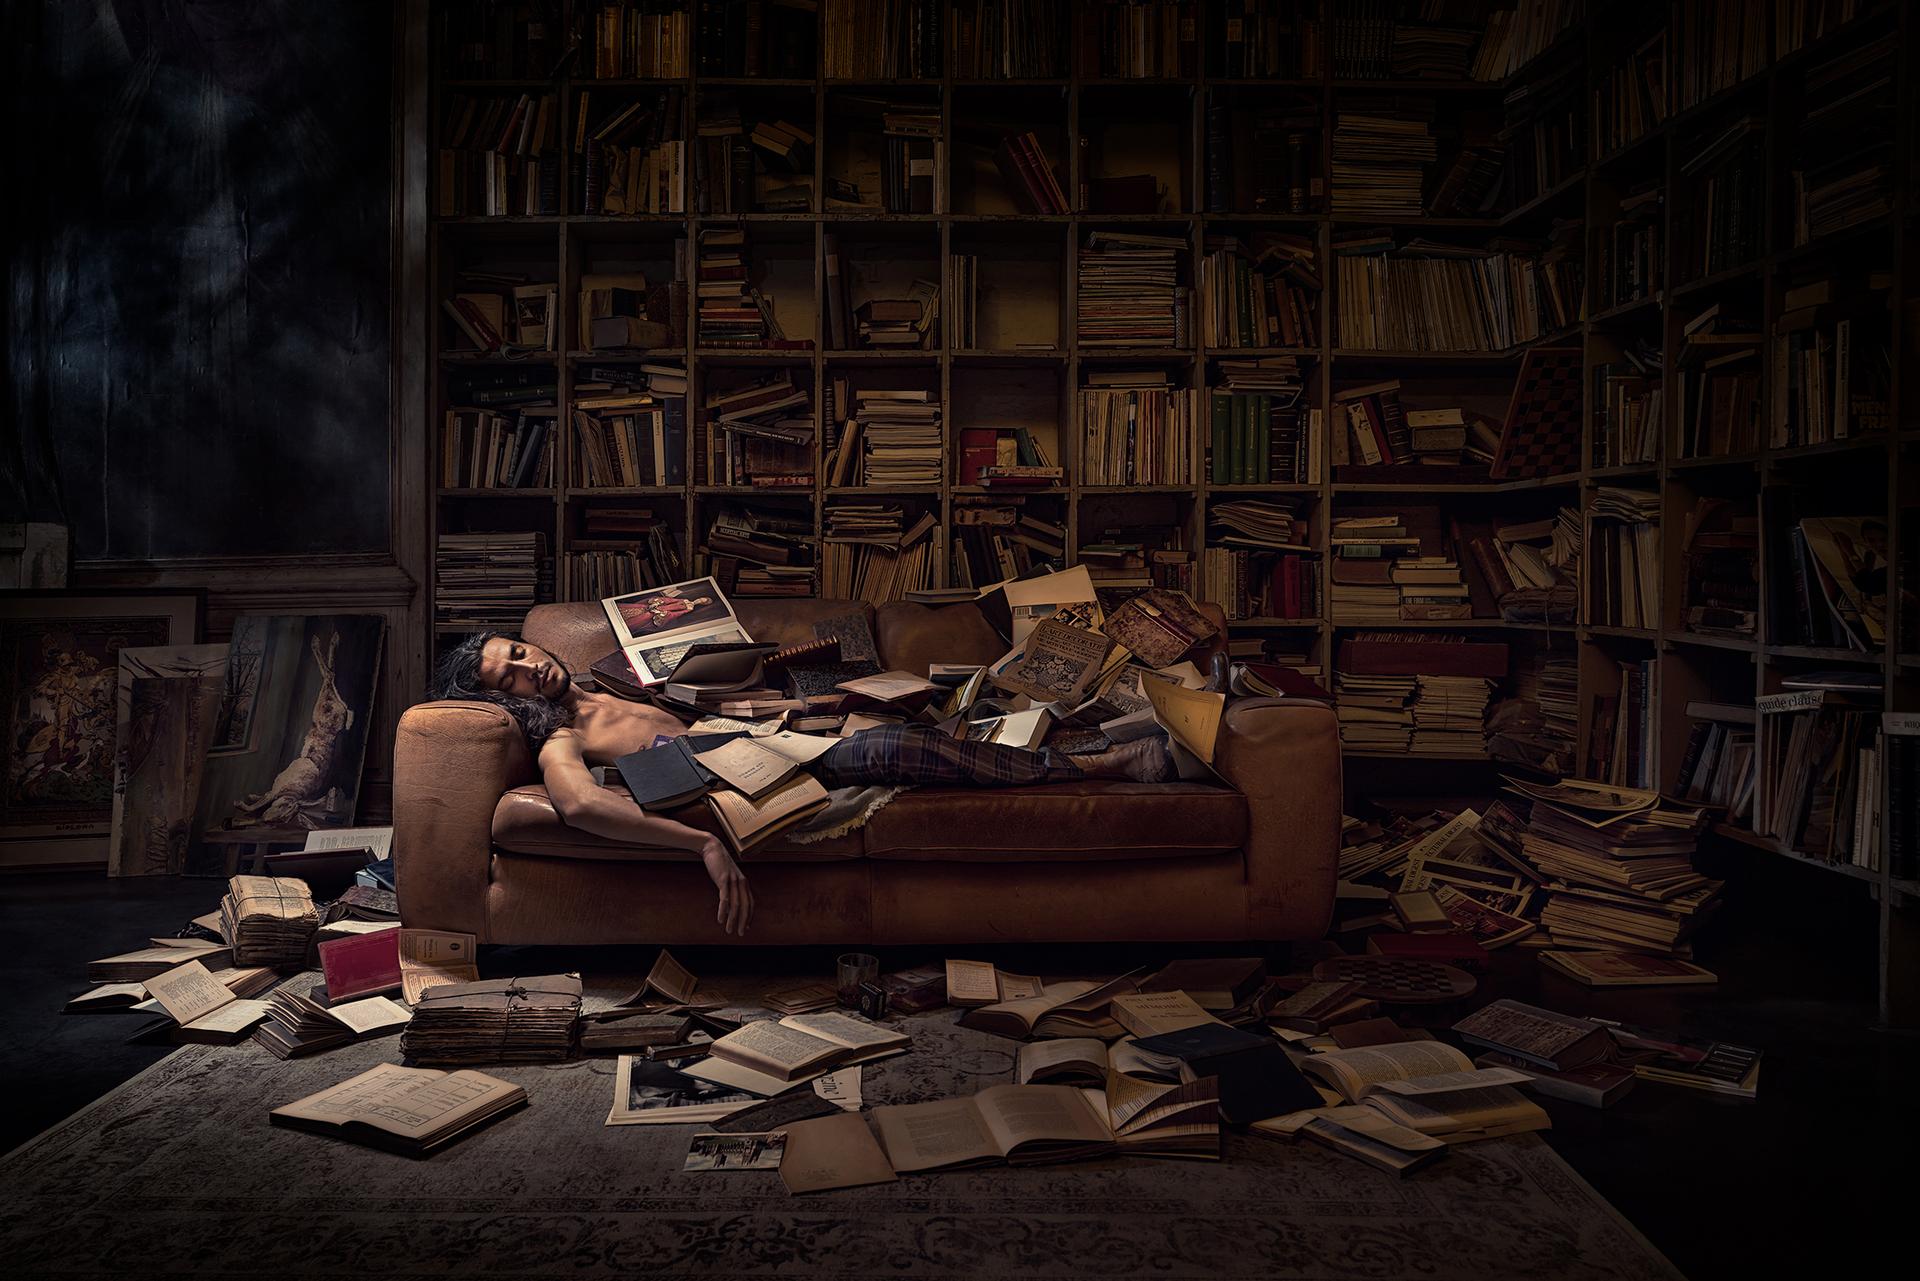 The Bookworm image